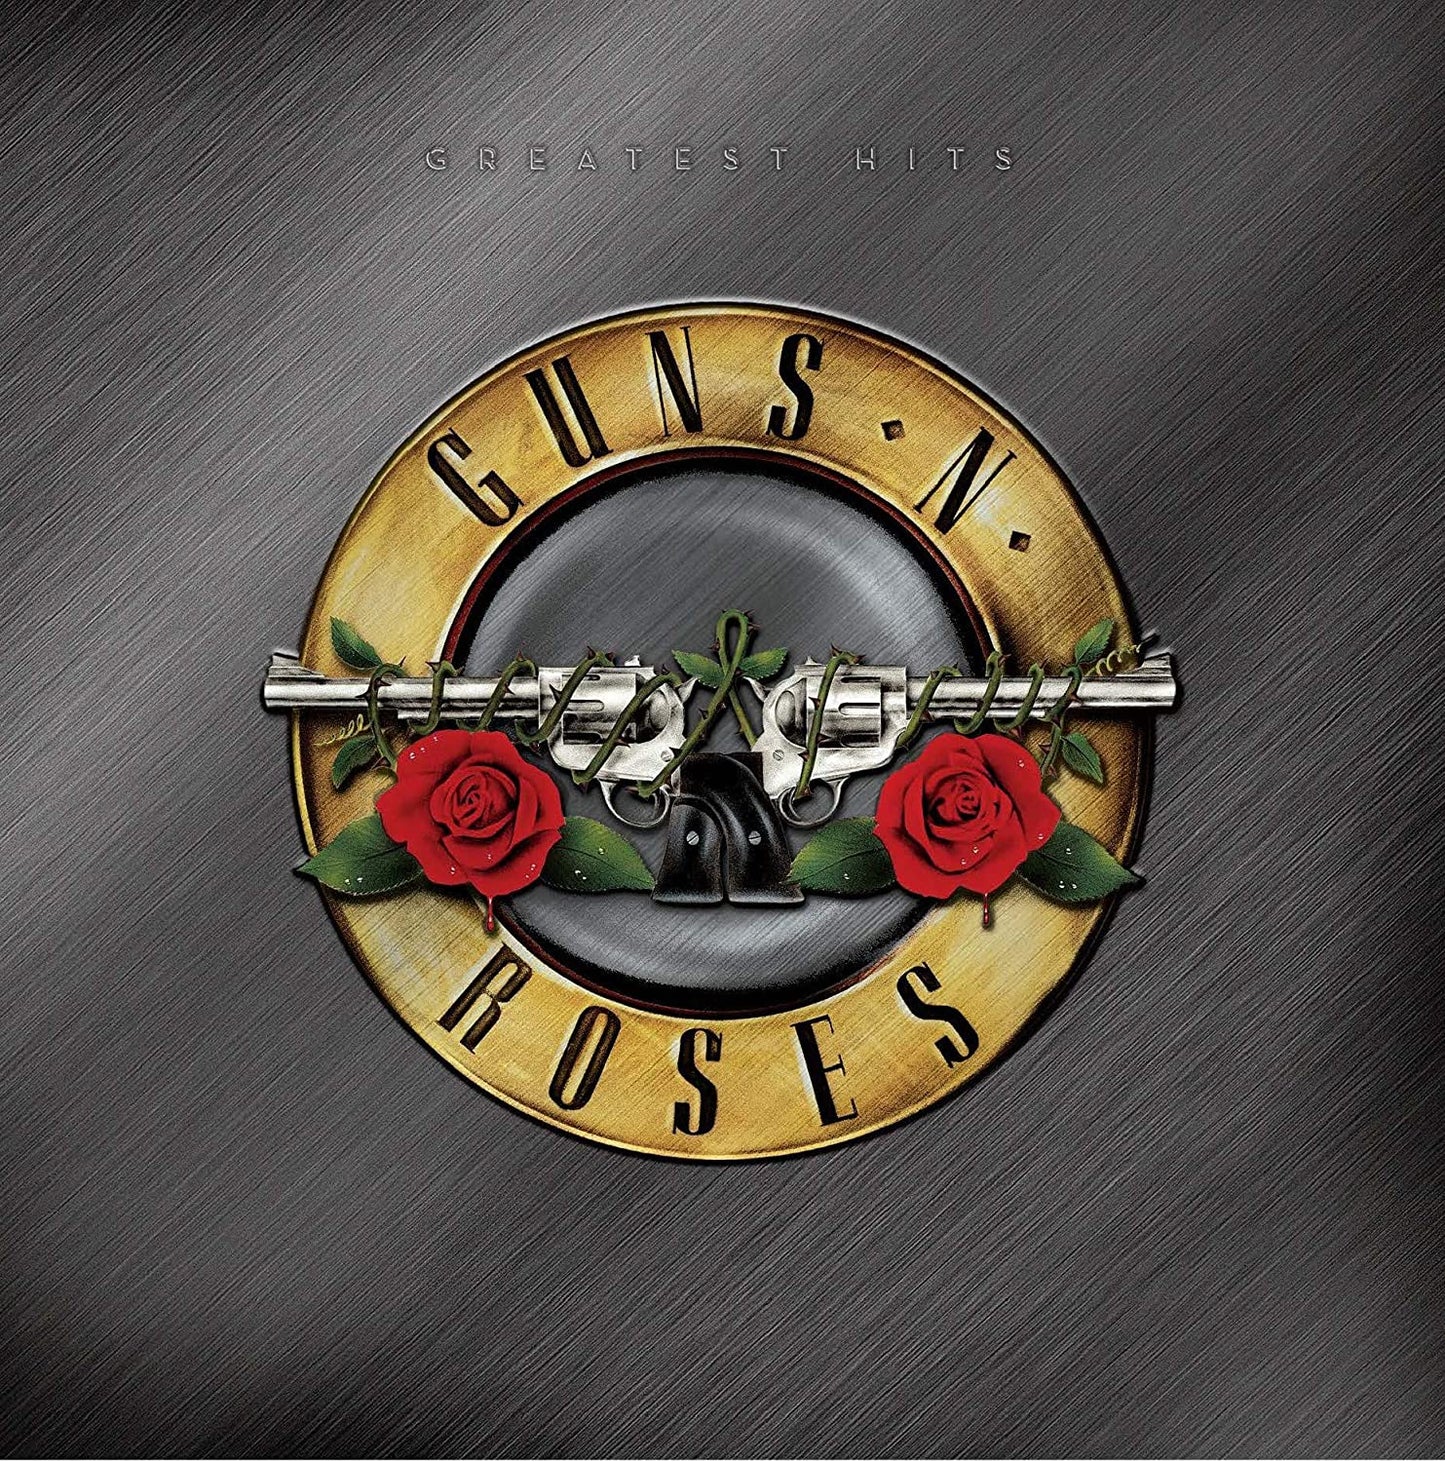 Guns N' Roses/Greatest Hits (Gold with Red & White Splatter) [LP]